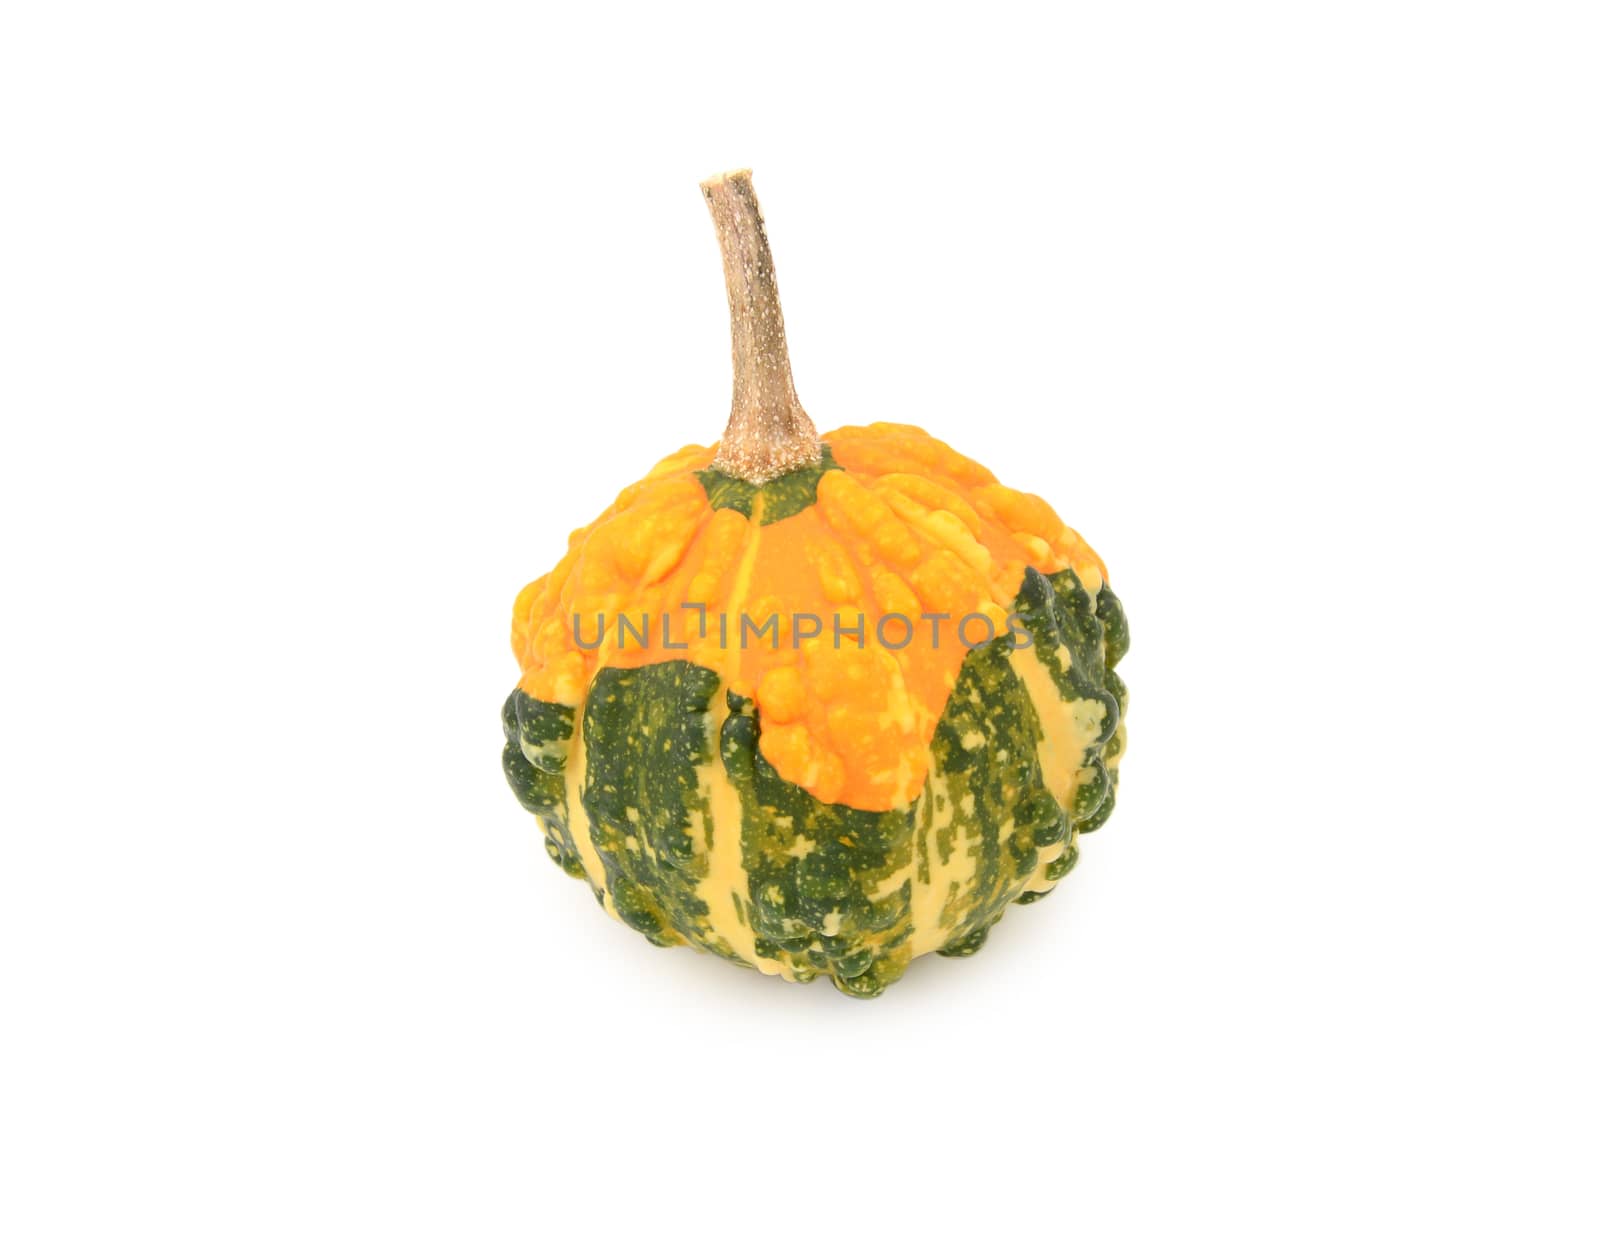 Autumnal warted gourd with orange skin and green and yellow stripes, on a white background